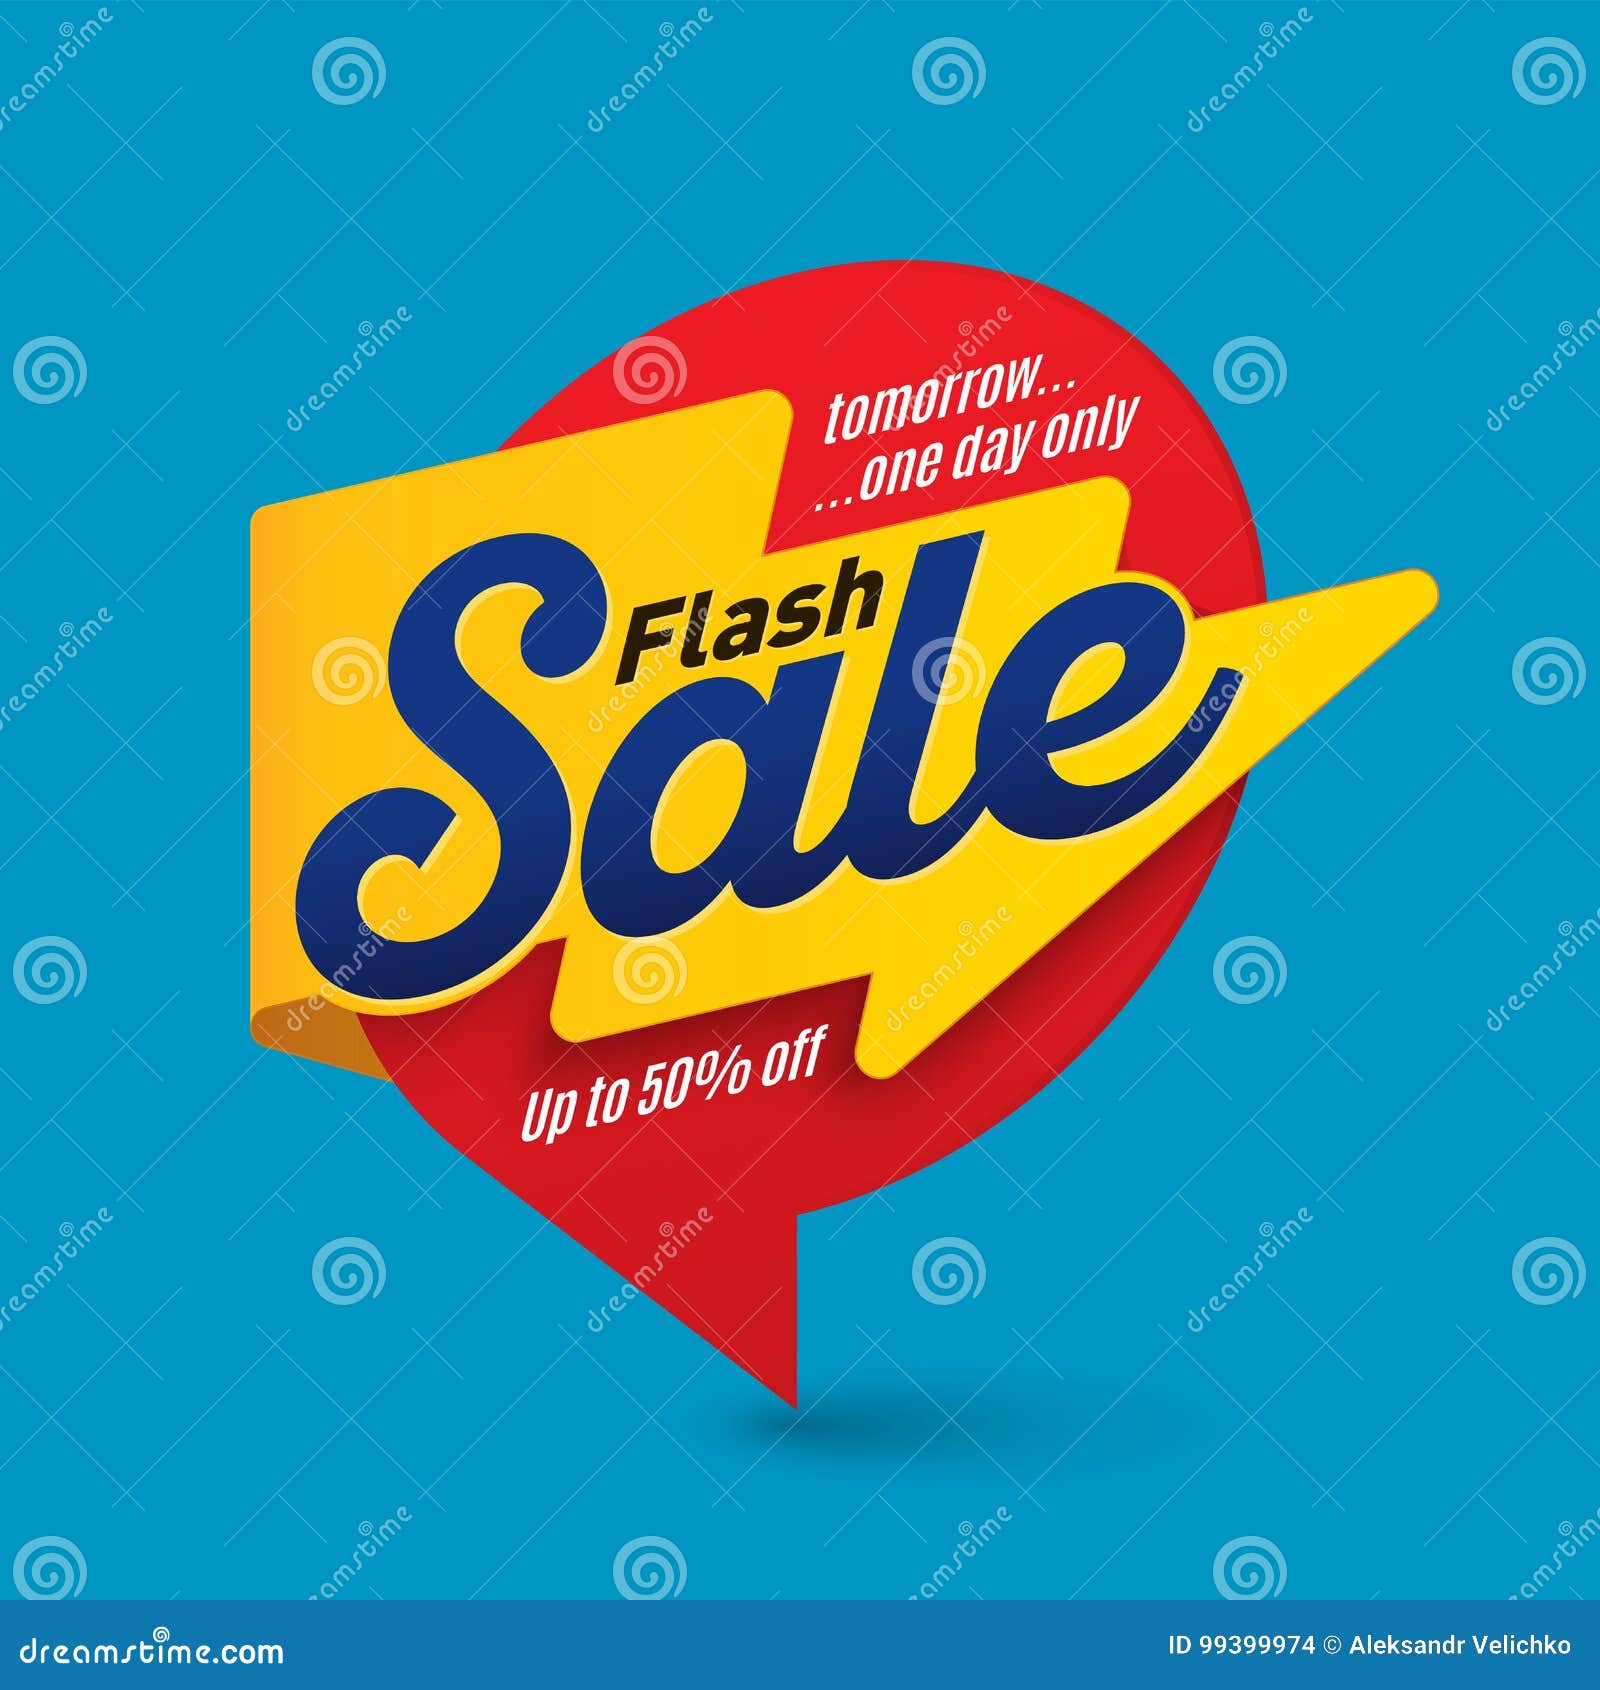 flash sale banner template, special offer, end of season